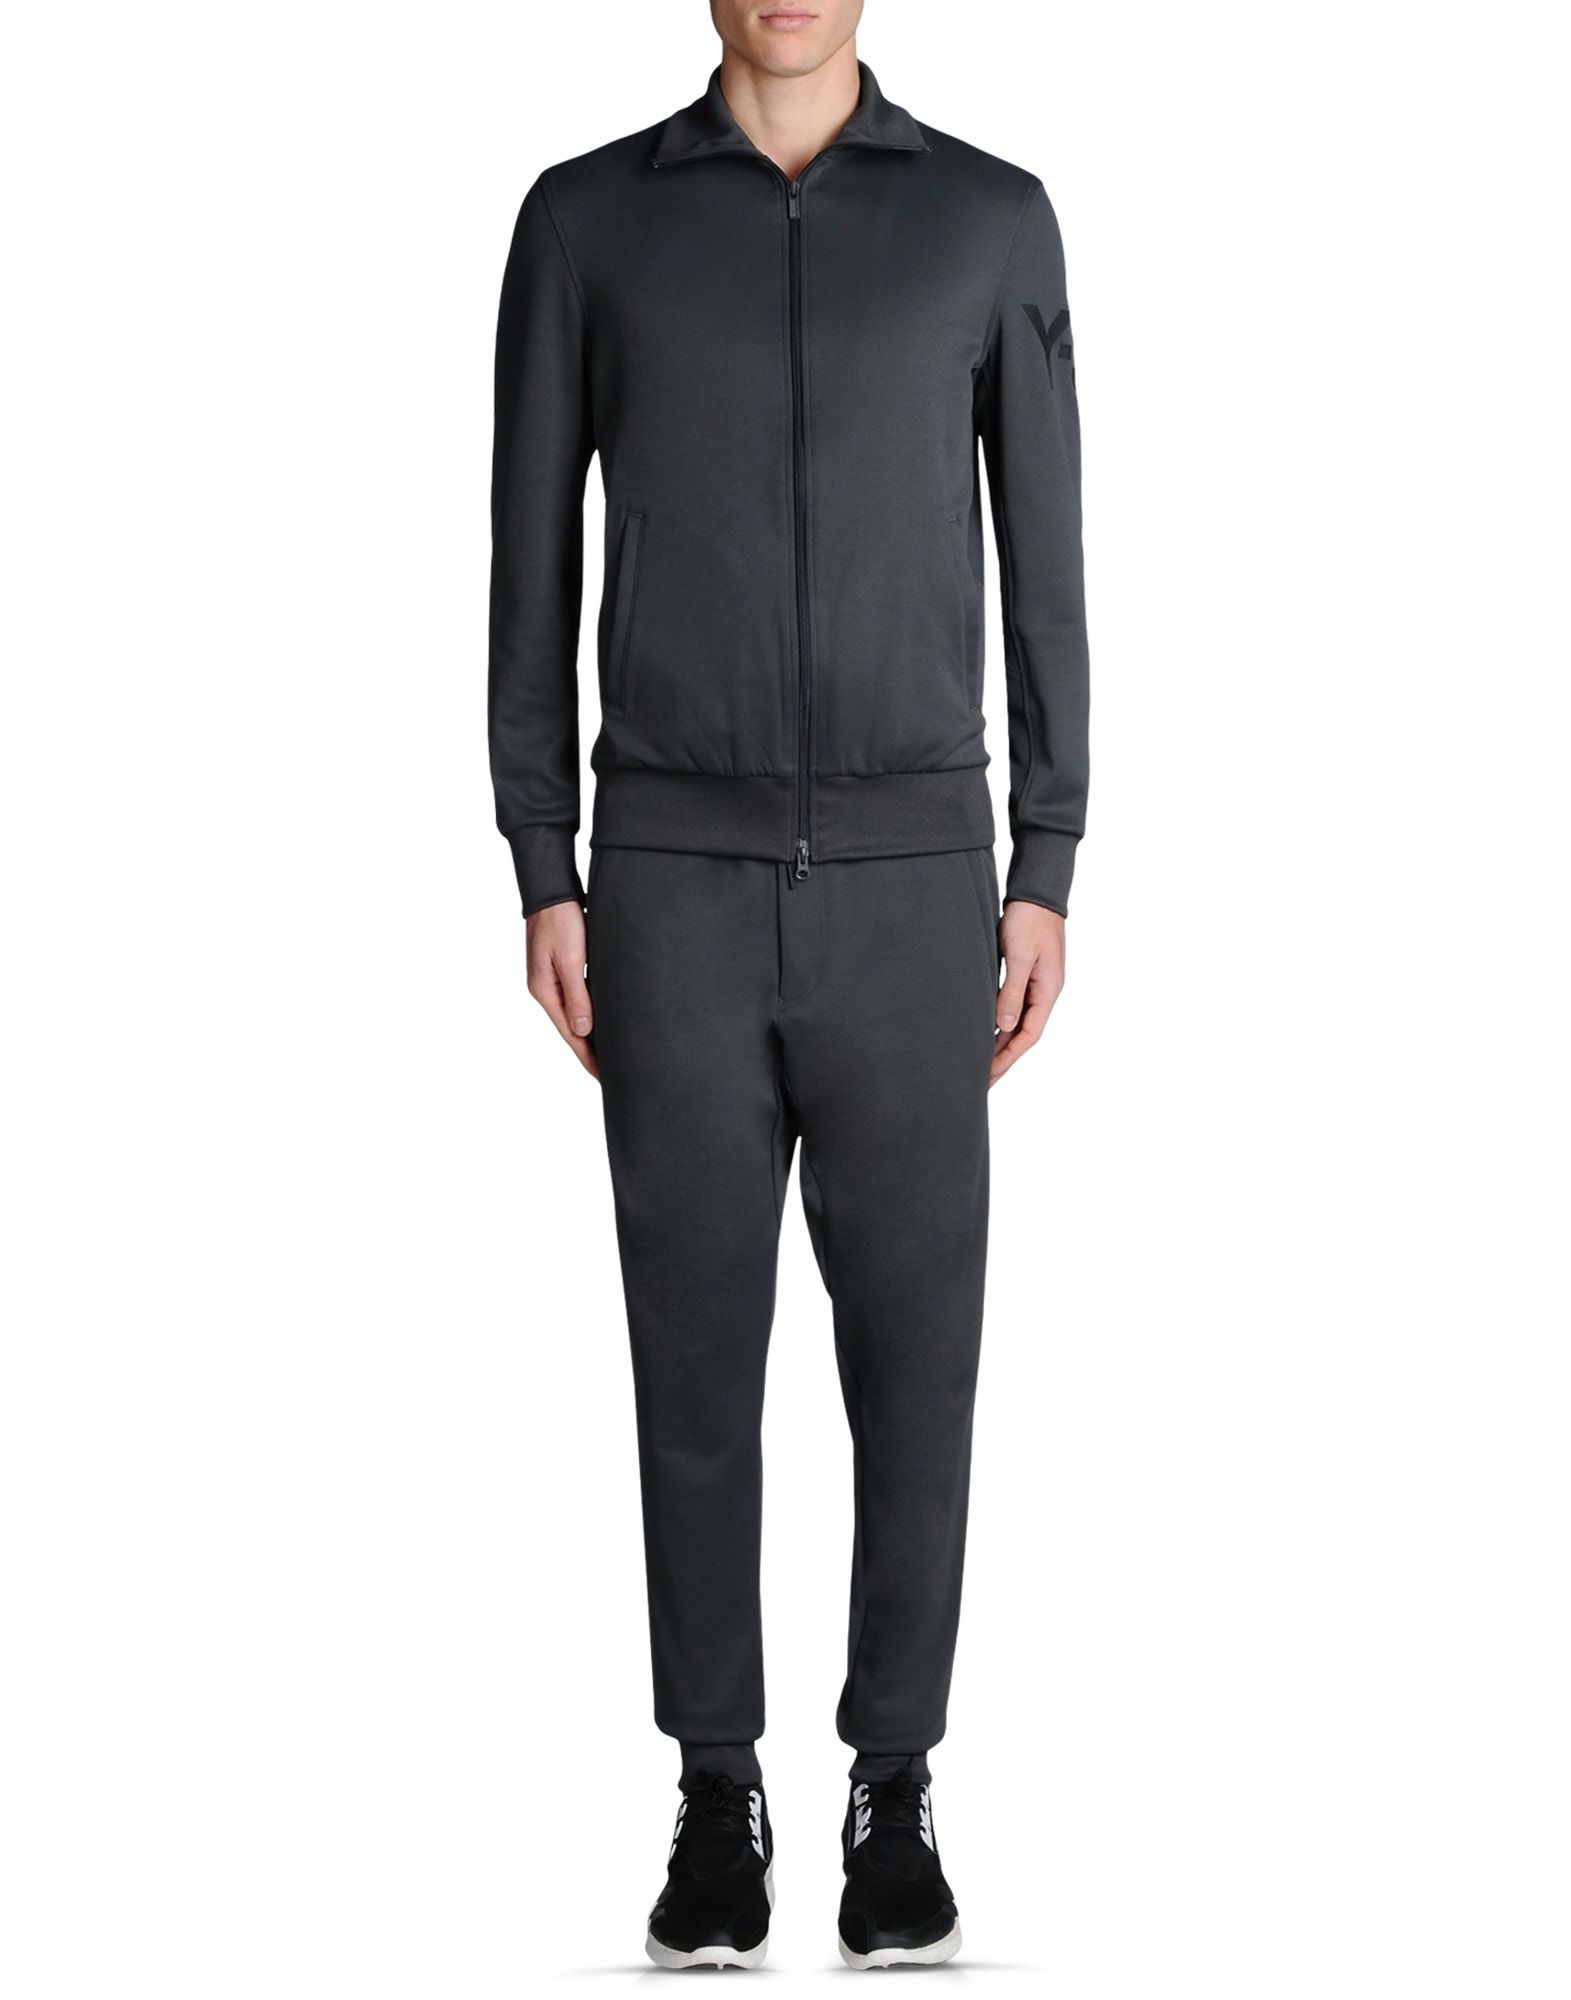 adidas y3 tracksuit Online Shopping for 